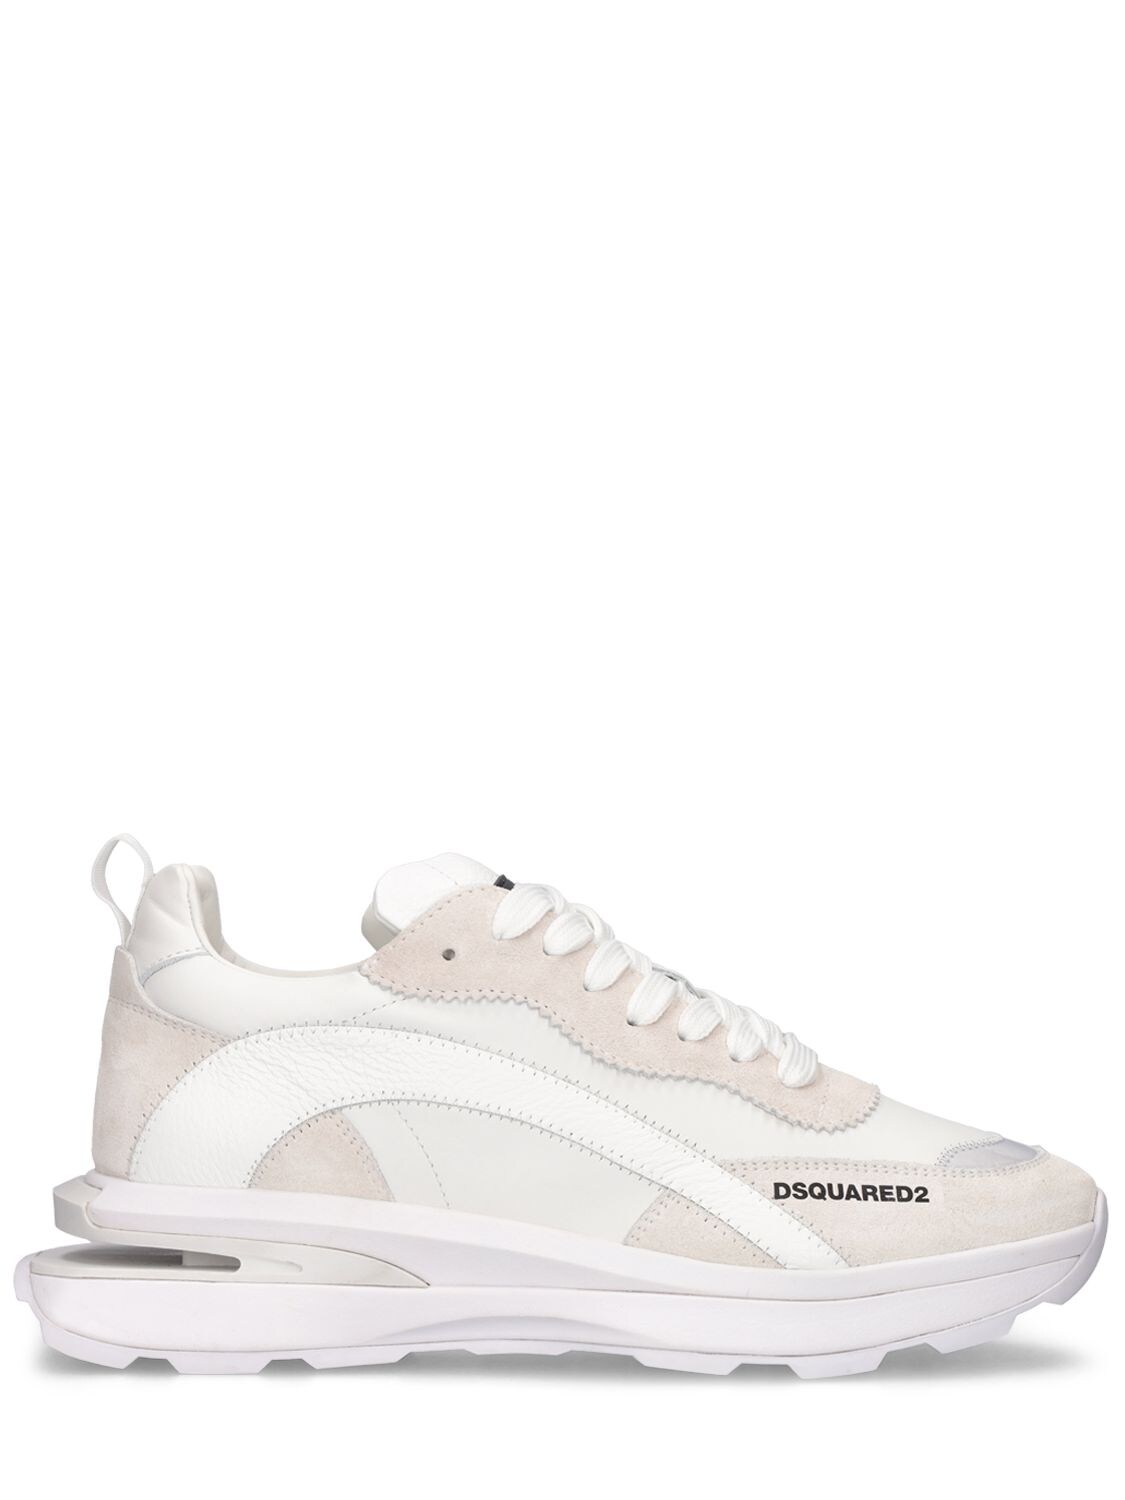 DSQUARED2 SLASH LEATHER & SUEDE SNEAKERS